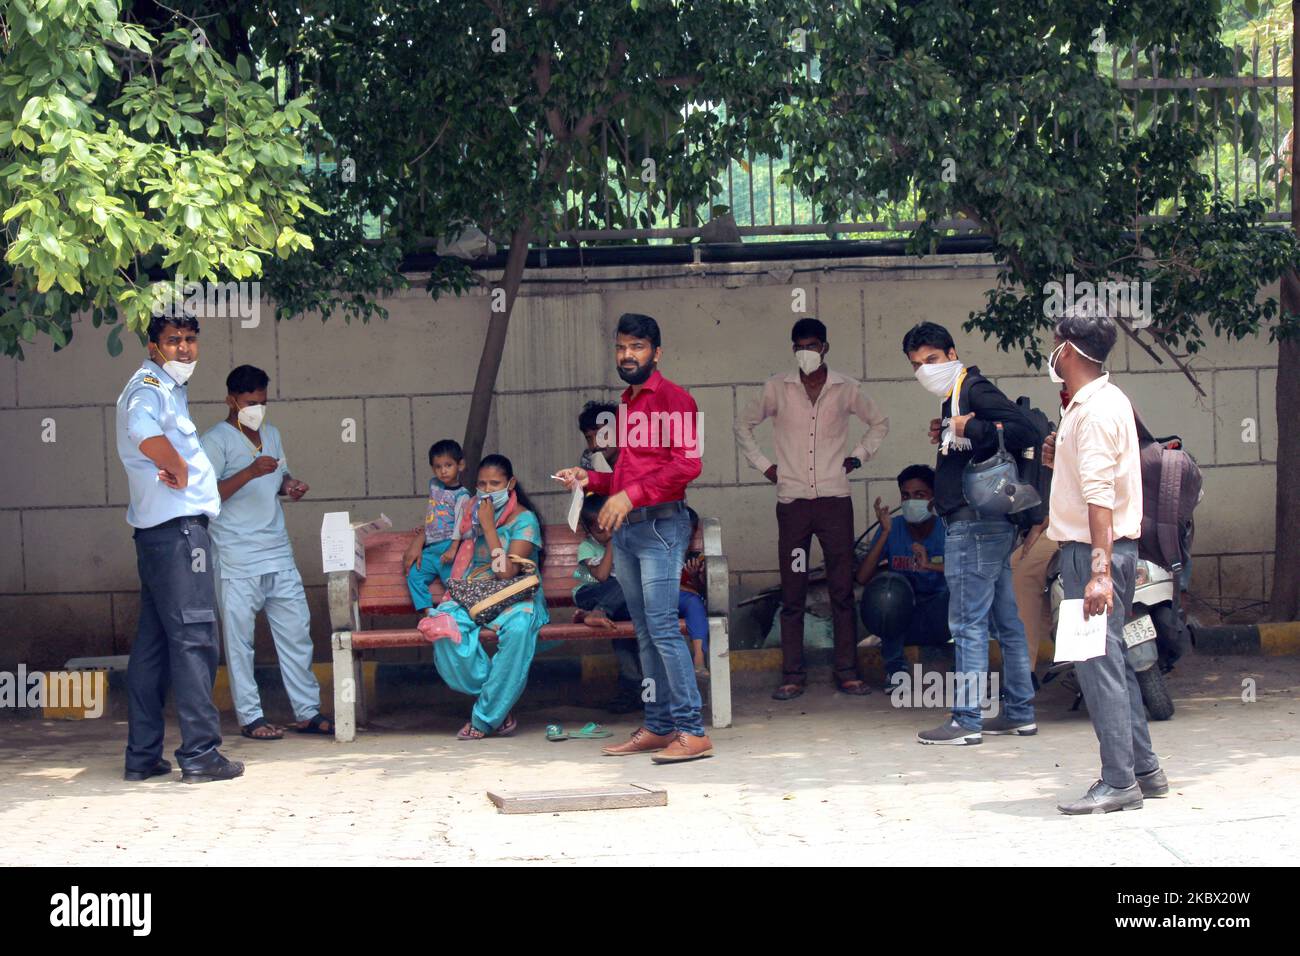 Patients wait for results after giving swab samples for Rapid Antigen Test (RAT) for the COVID-19 coronavirus at Chacha Nehru Bal Chikitsalaya near Geeta Colony in New Delhi on August 11, 2020. For the past seven days, India's single-day count of Covid-19 cases has been more than that of the US and Brazil, the two worst-hit nations in terms of infections, according to an analysis of WHO data. India, the third worst-hit nation in terms of infections, has also accounted for over 23 per cent of the cases and more than 15 per cent of the deaths reported worldwide between August 4-10. (Photo by May Stock Photo